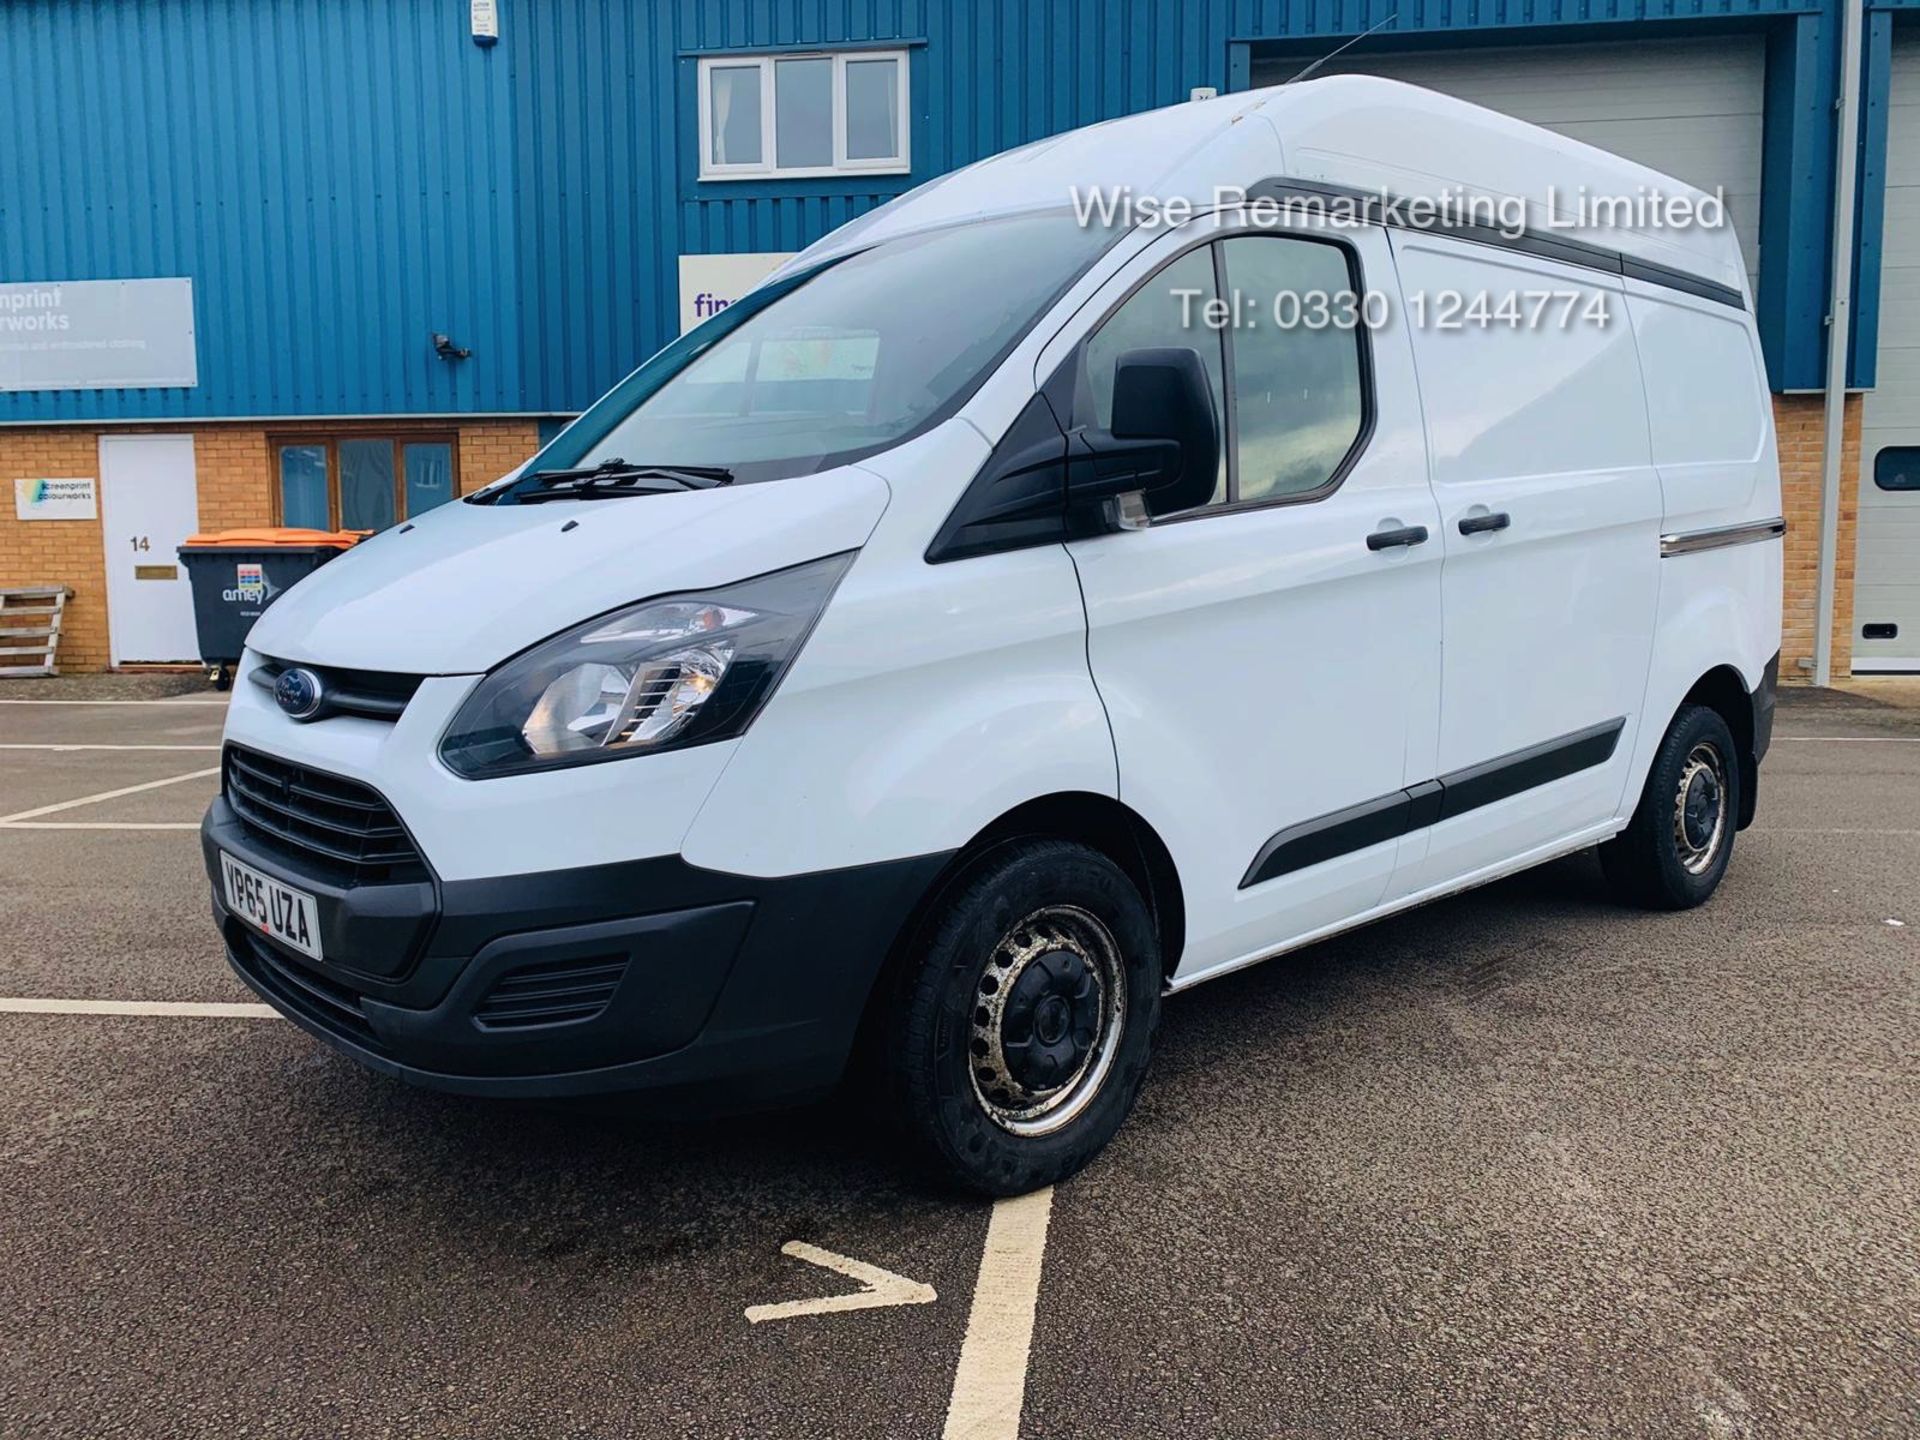 (RESERVE MET) Ford Transit Custom 2.2 TDCI 290 **HIGH ROOF** - 2016 Model - AIR CON- 1 OWNER- FSH- - Image 2 of 24